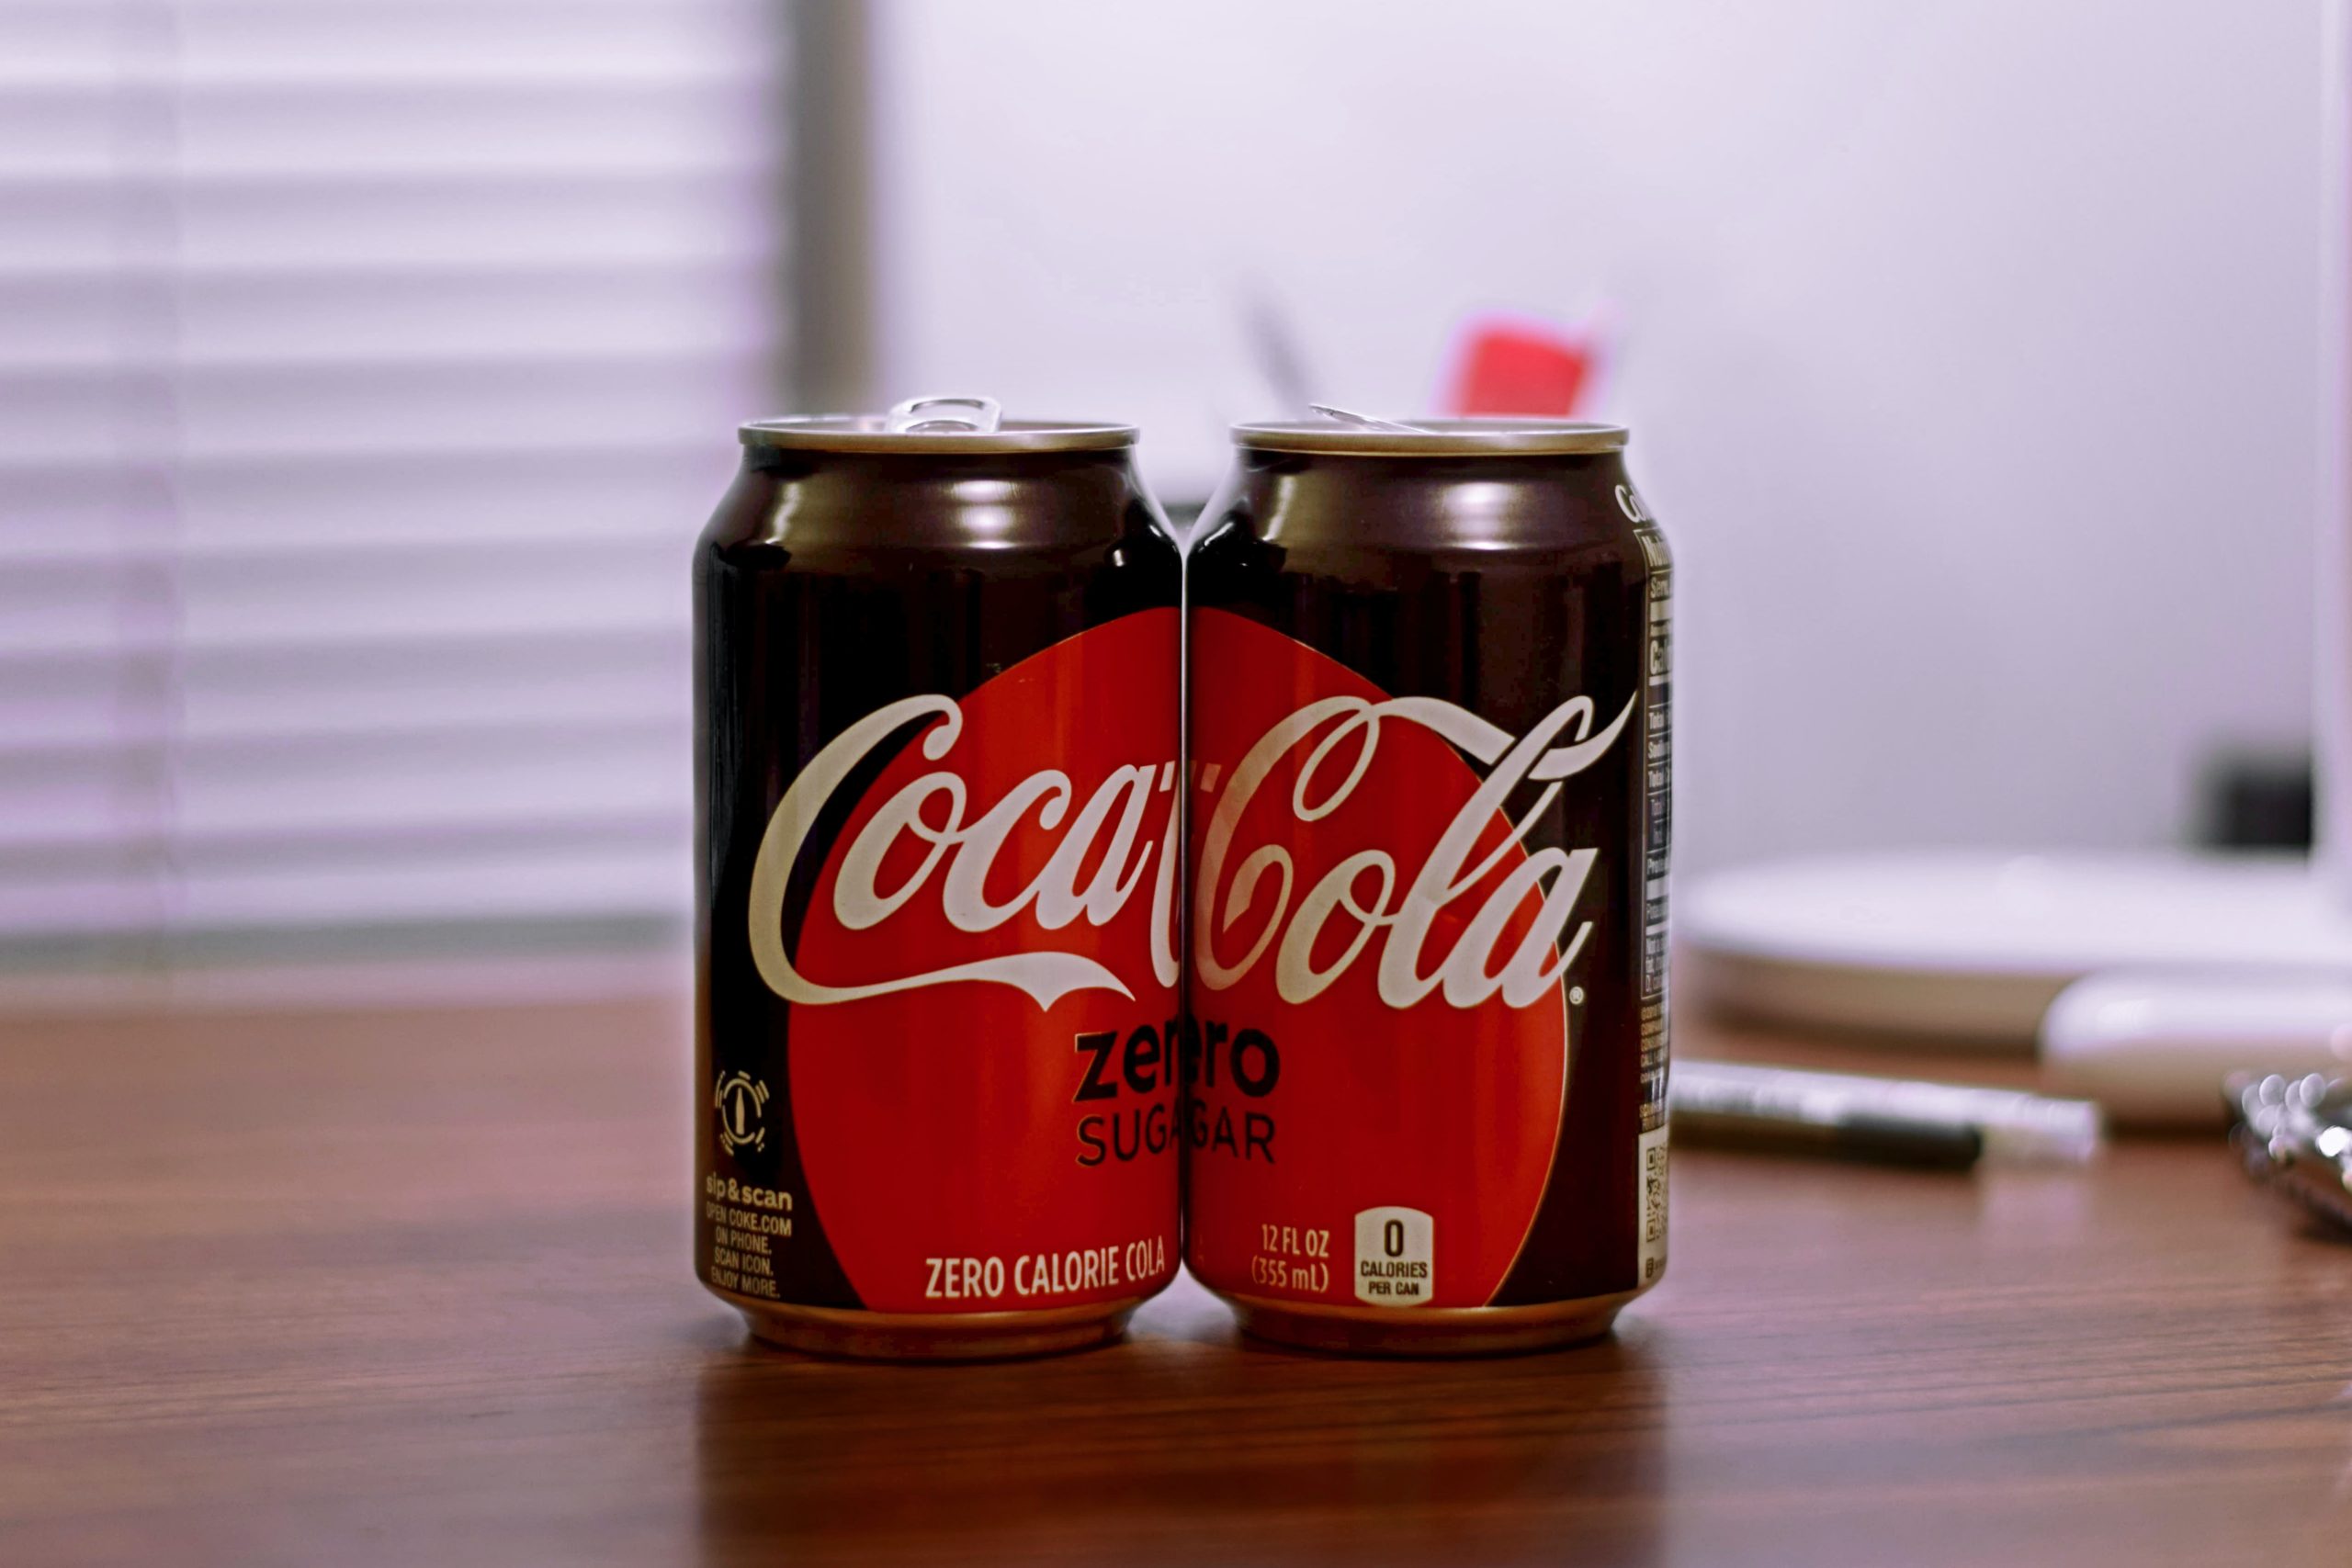 Two cans of Coke Zero. Coke Zero contains aspartame which is a low-calorie, low FOMDAP sweetener. Image from Unsplash.